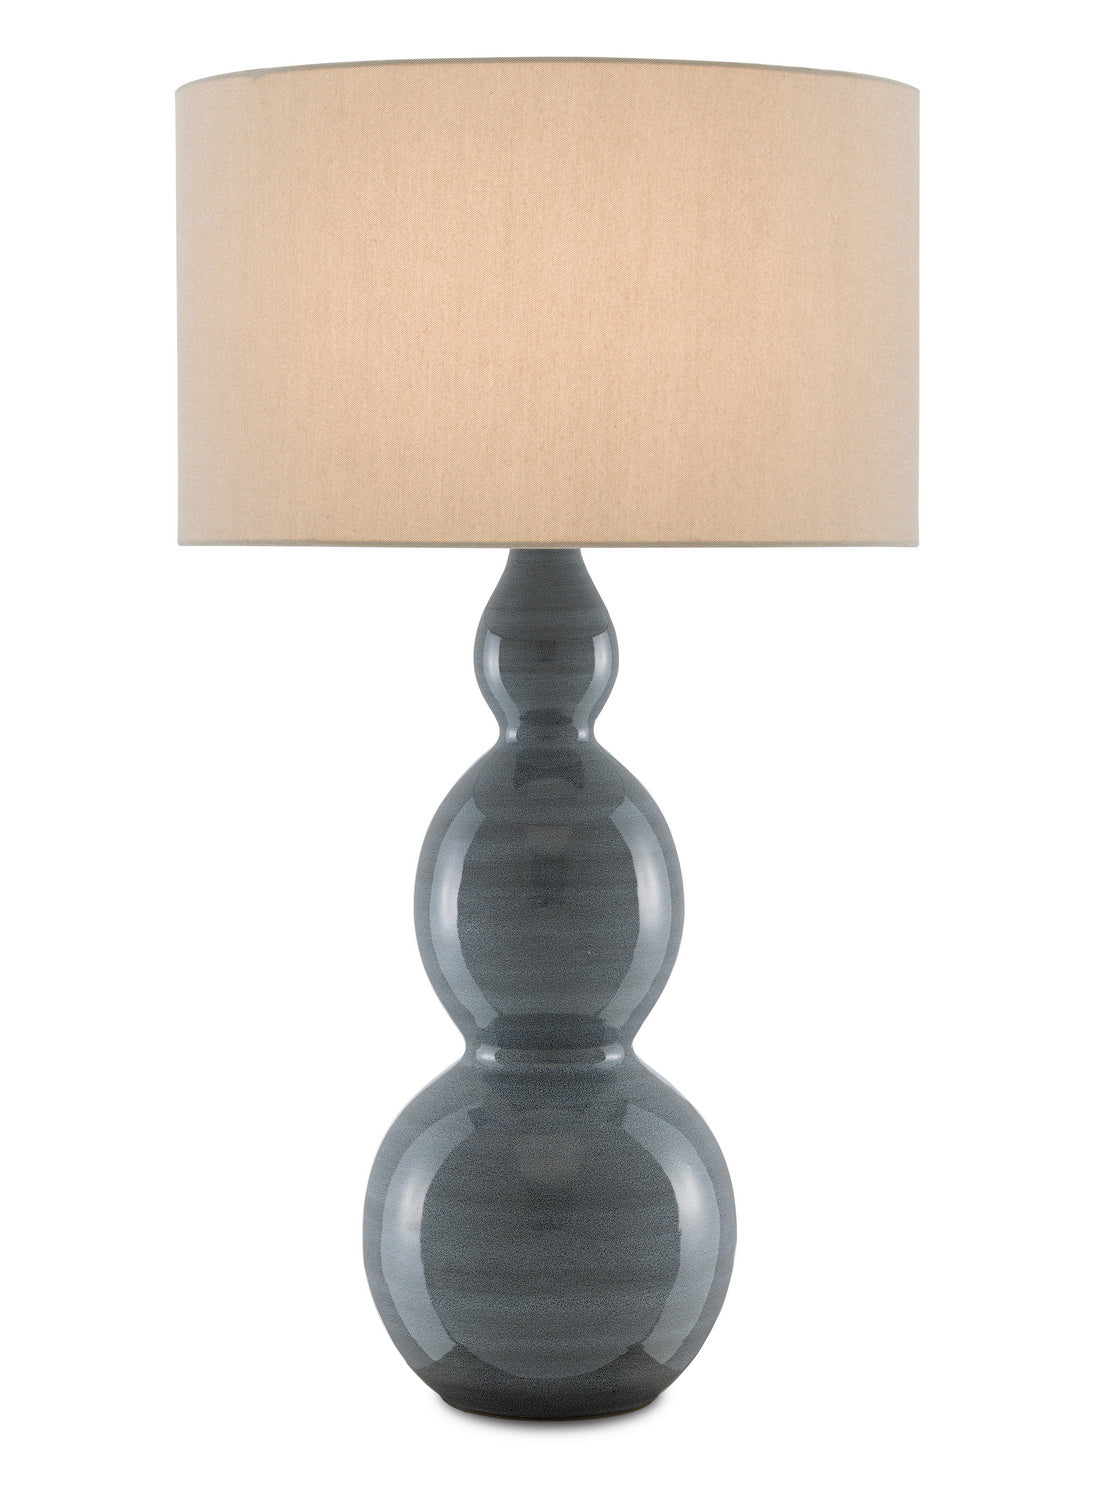 One Light Table Lamp from the Cymbeline collection in Steel Blue finish